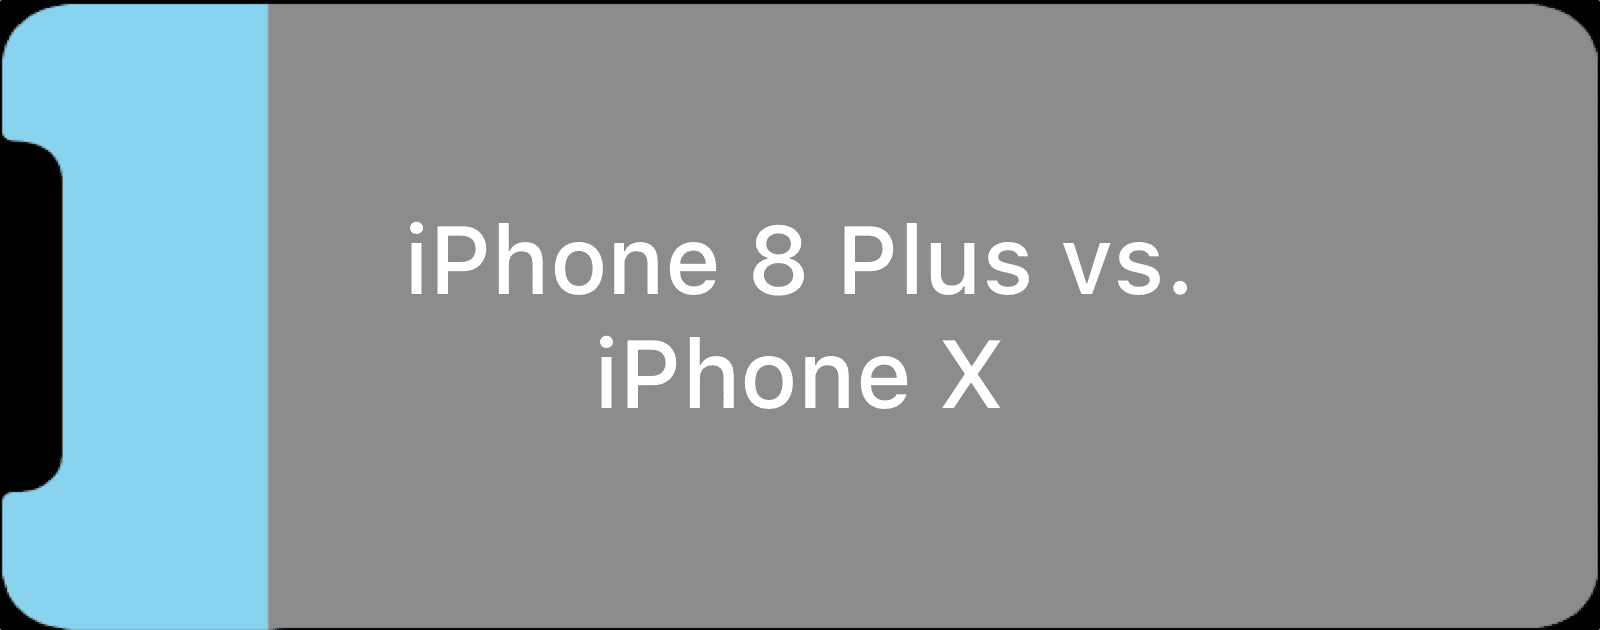 What’s the Difference Between iPhone 8 Plus and iPhone X Aspect Ratio?